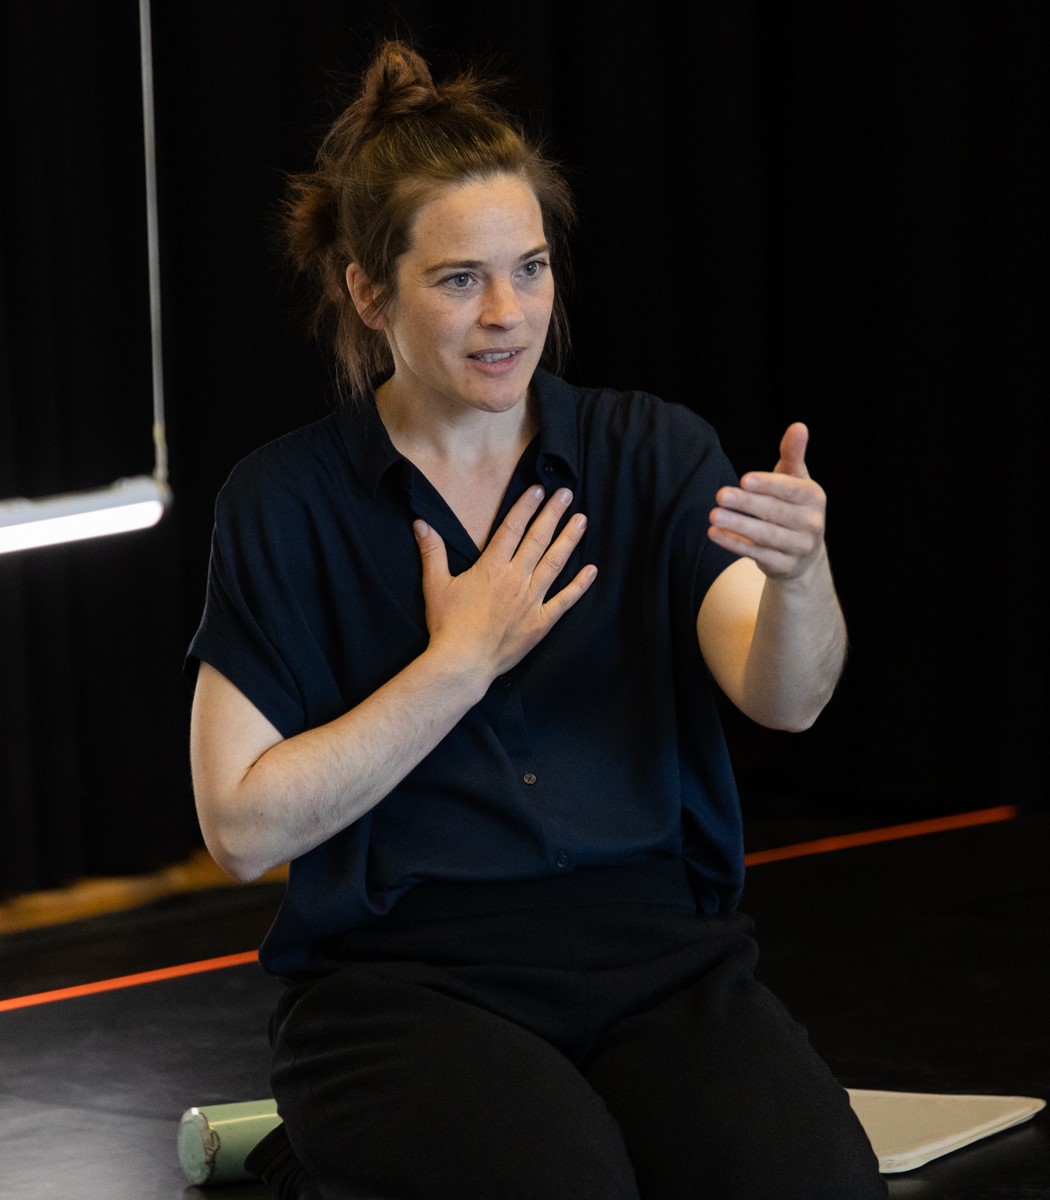 Stephanie Scheubeck as an experienced lecturer knows the tools how to communicate her ideas regarding the relationship between synaesthesia and dance improvisation.